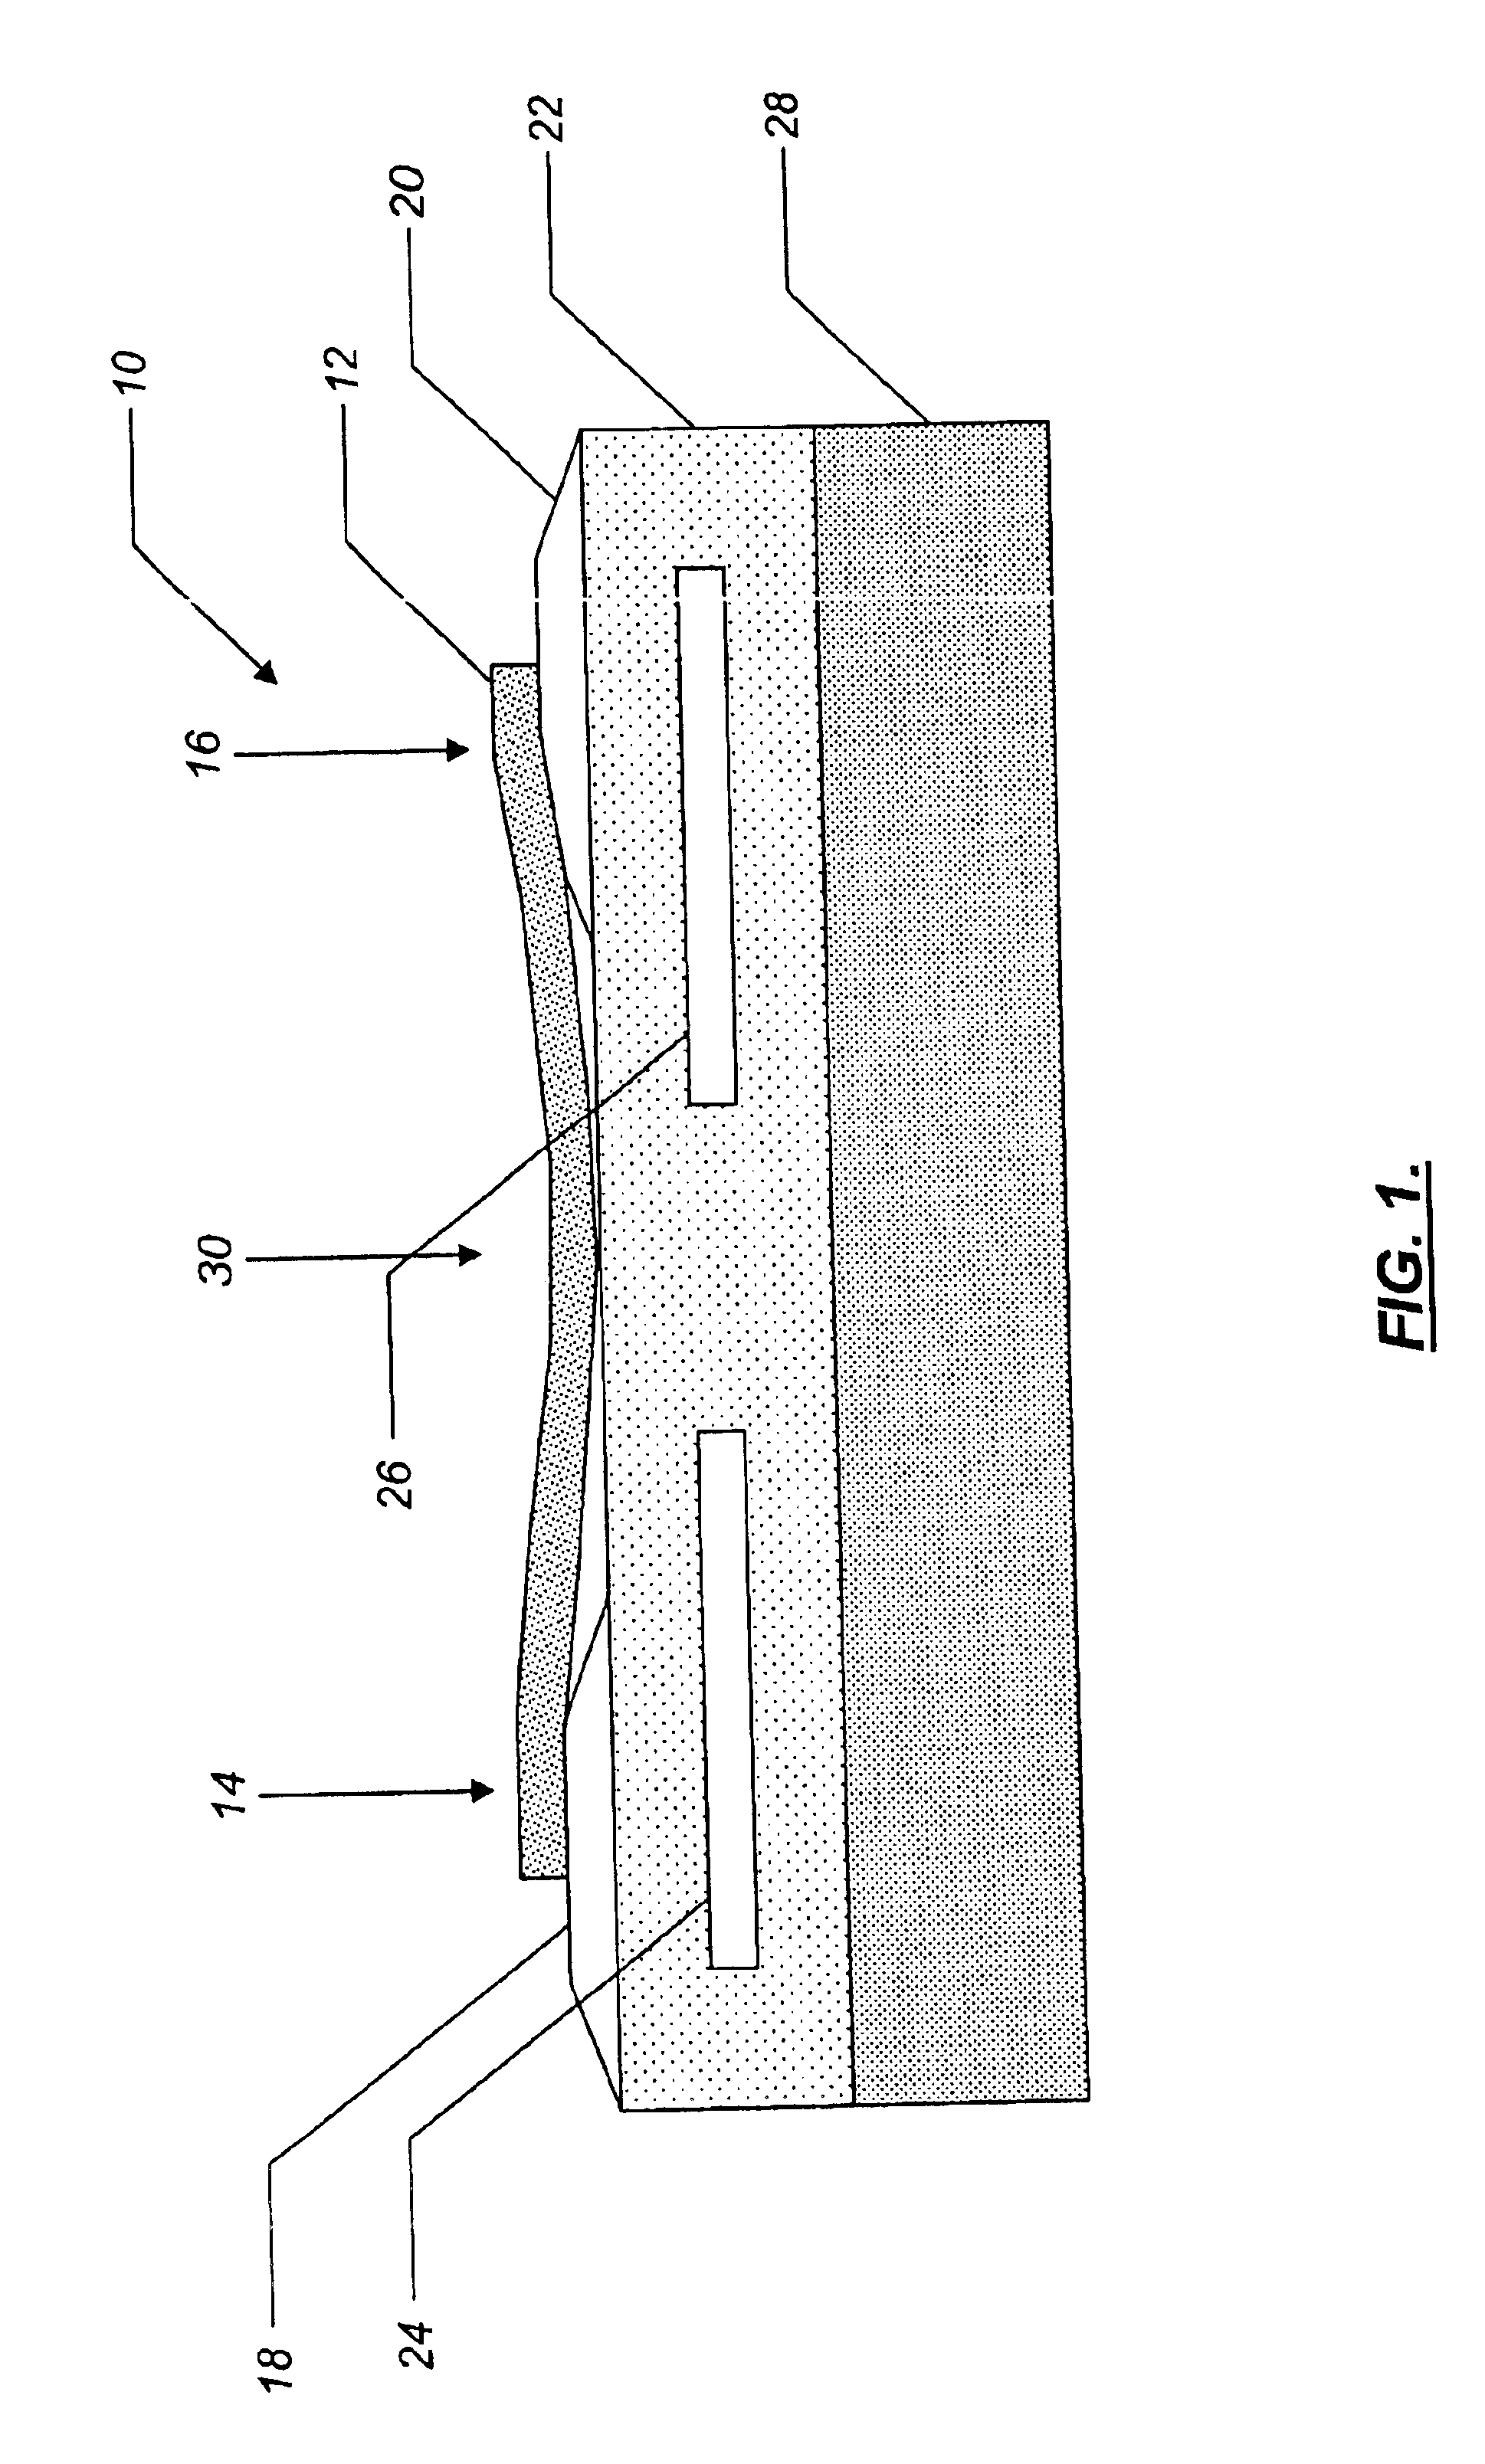 Method for forming an electrostatically-doped carbon nanotube device